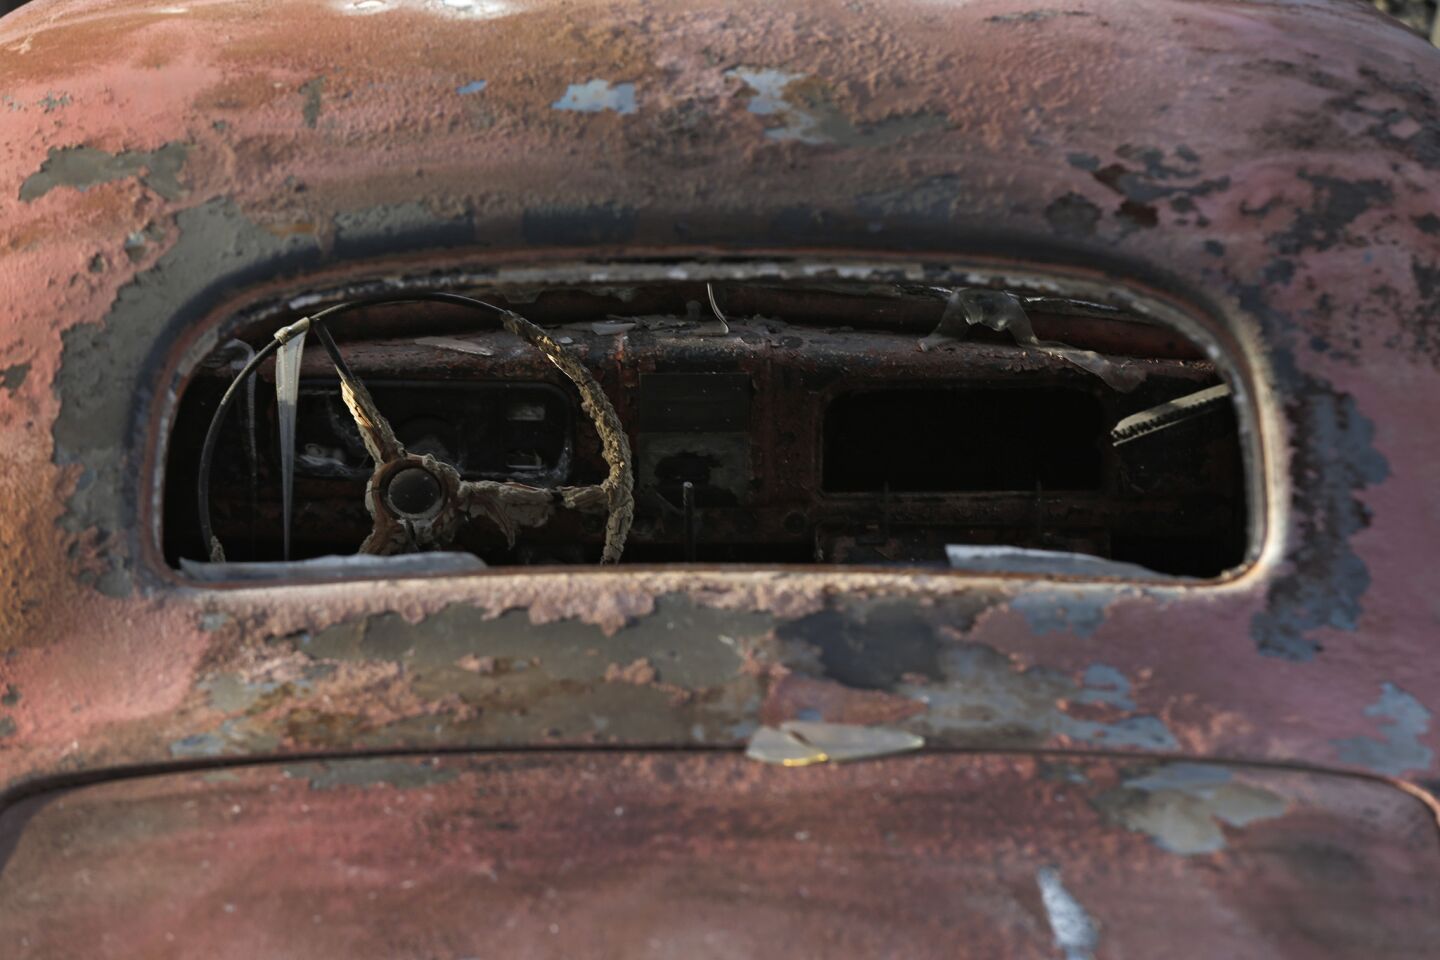 The melted ruins of an old car sits in the driveway of a home in the Angel Valley neighborhood of Weed, CA.